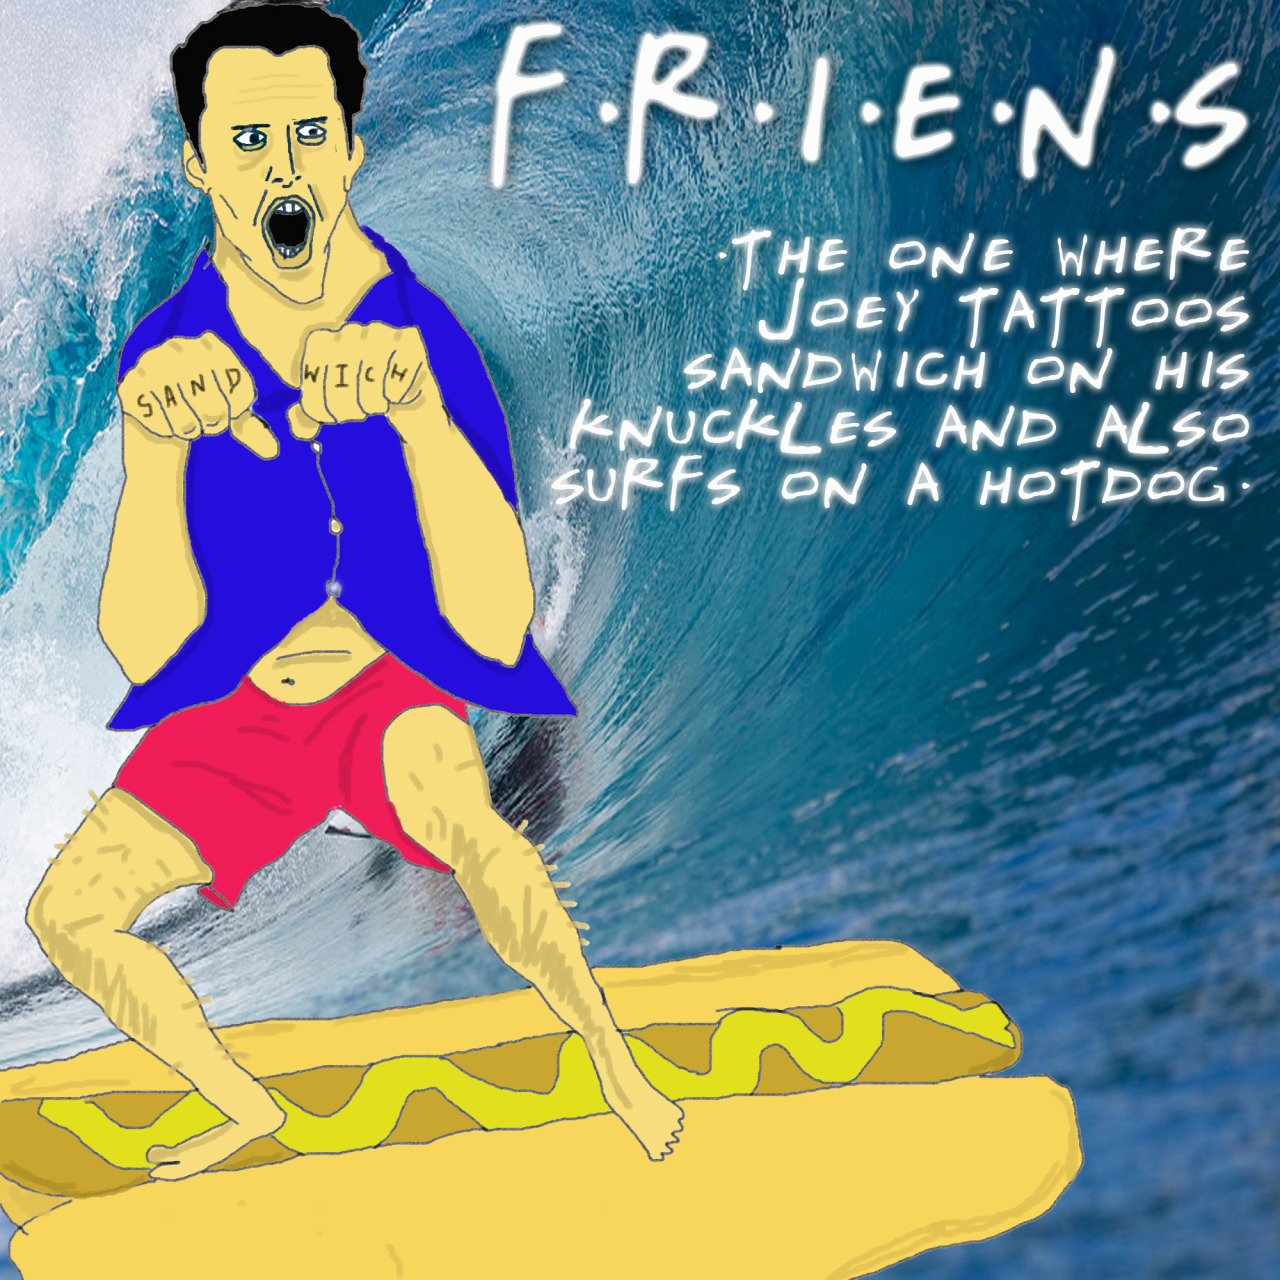 If you like my BASS DOGS, you might like my new TUMBLR called FRIENS, on which I draw episodes of the TV Show Friends that never happened.
Check it out, if you&#8217;re into that sort of thing:
http://friens.tumblr.com
http://www.twitter.com/friensepisodes
http://www.facebook.com/friens